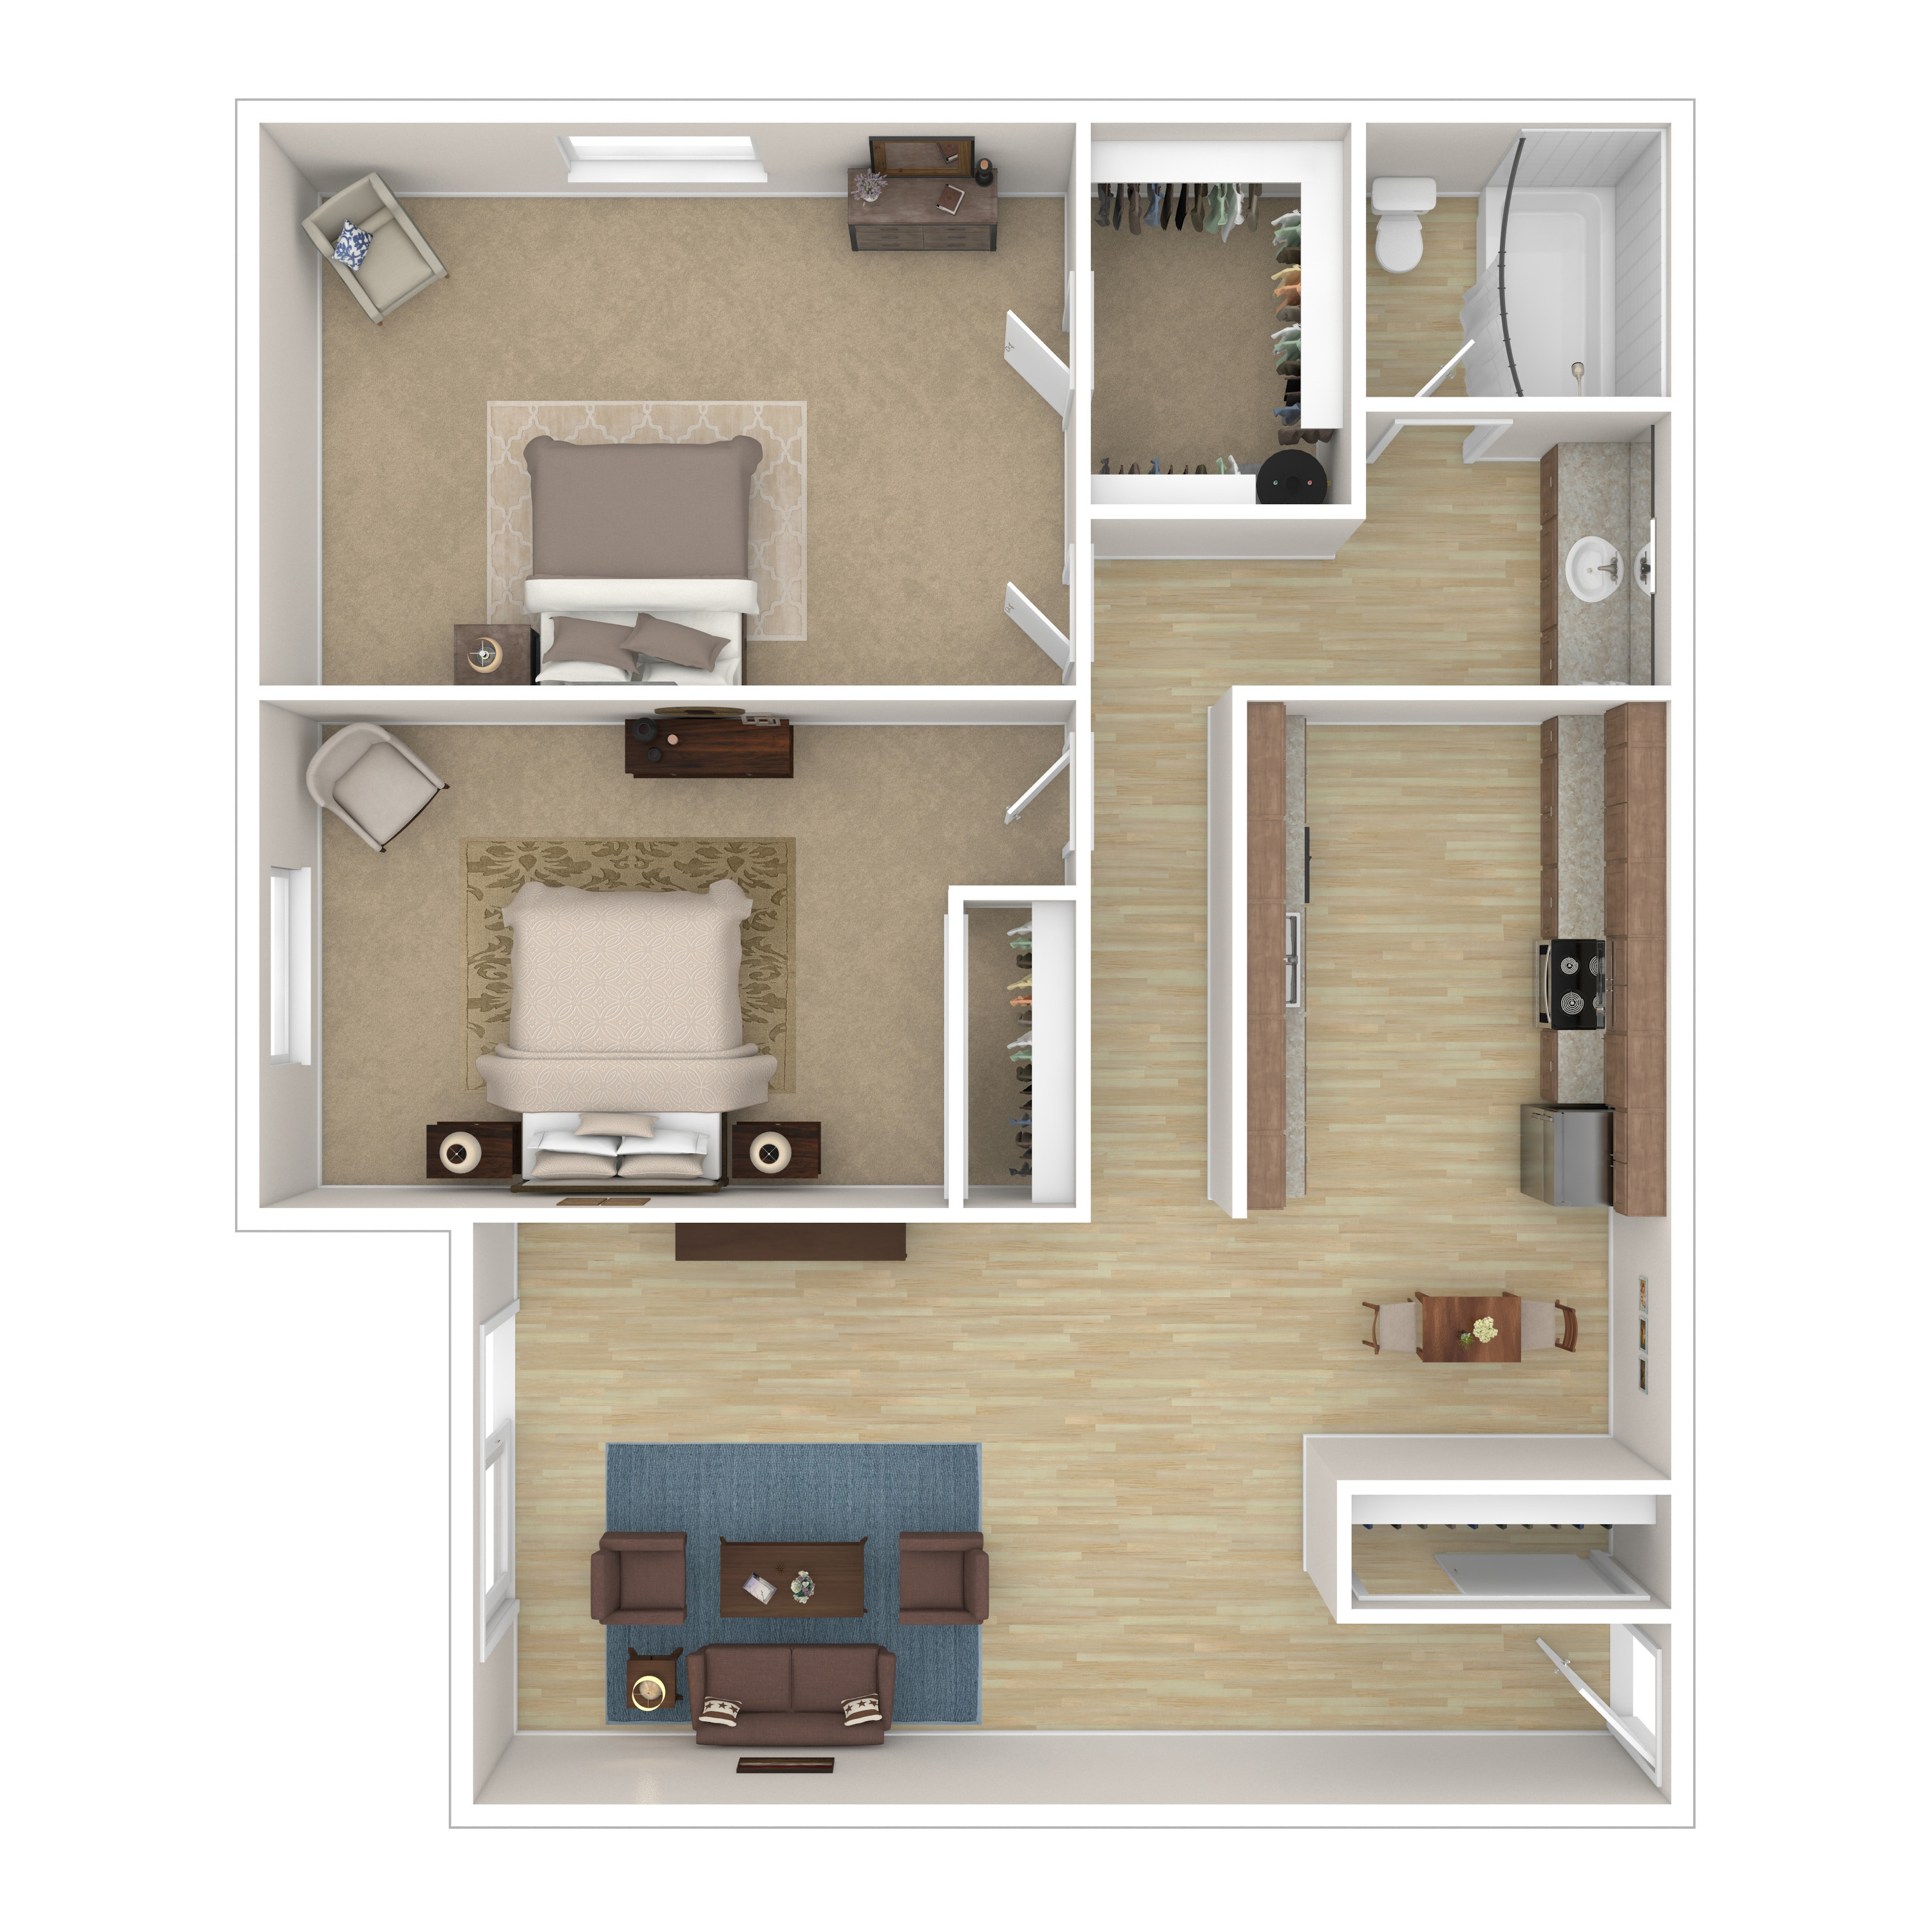 Floor Plans at Cherry Hill Apartments Apartments